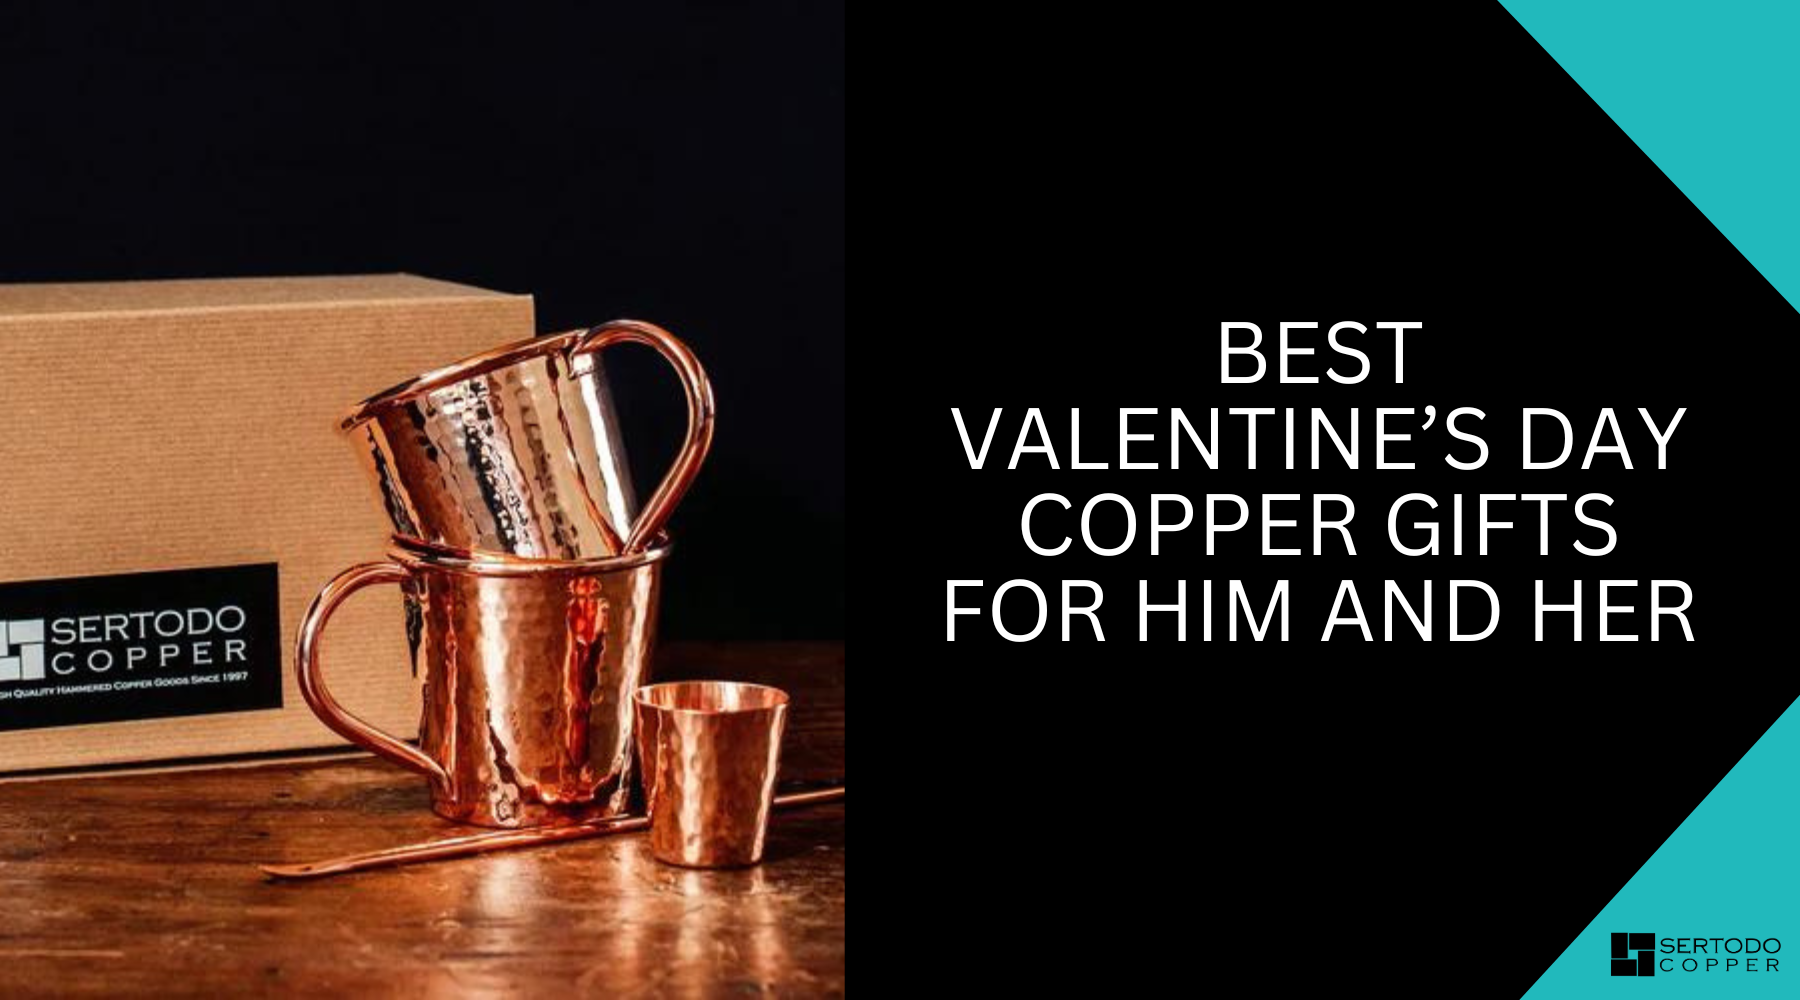 Best Valentine's Day Copper Gifts For Him and Her